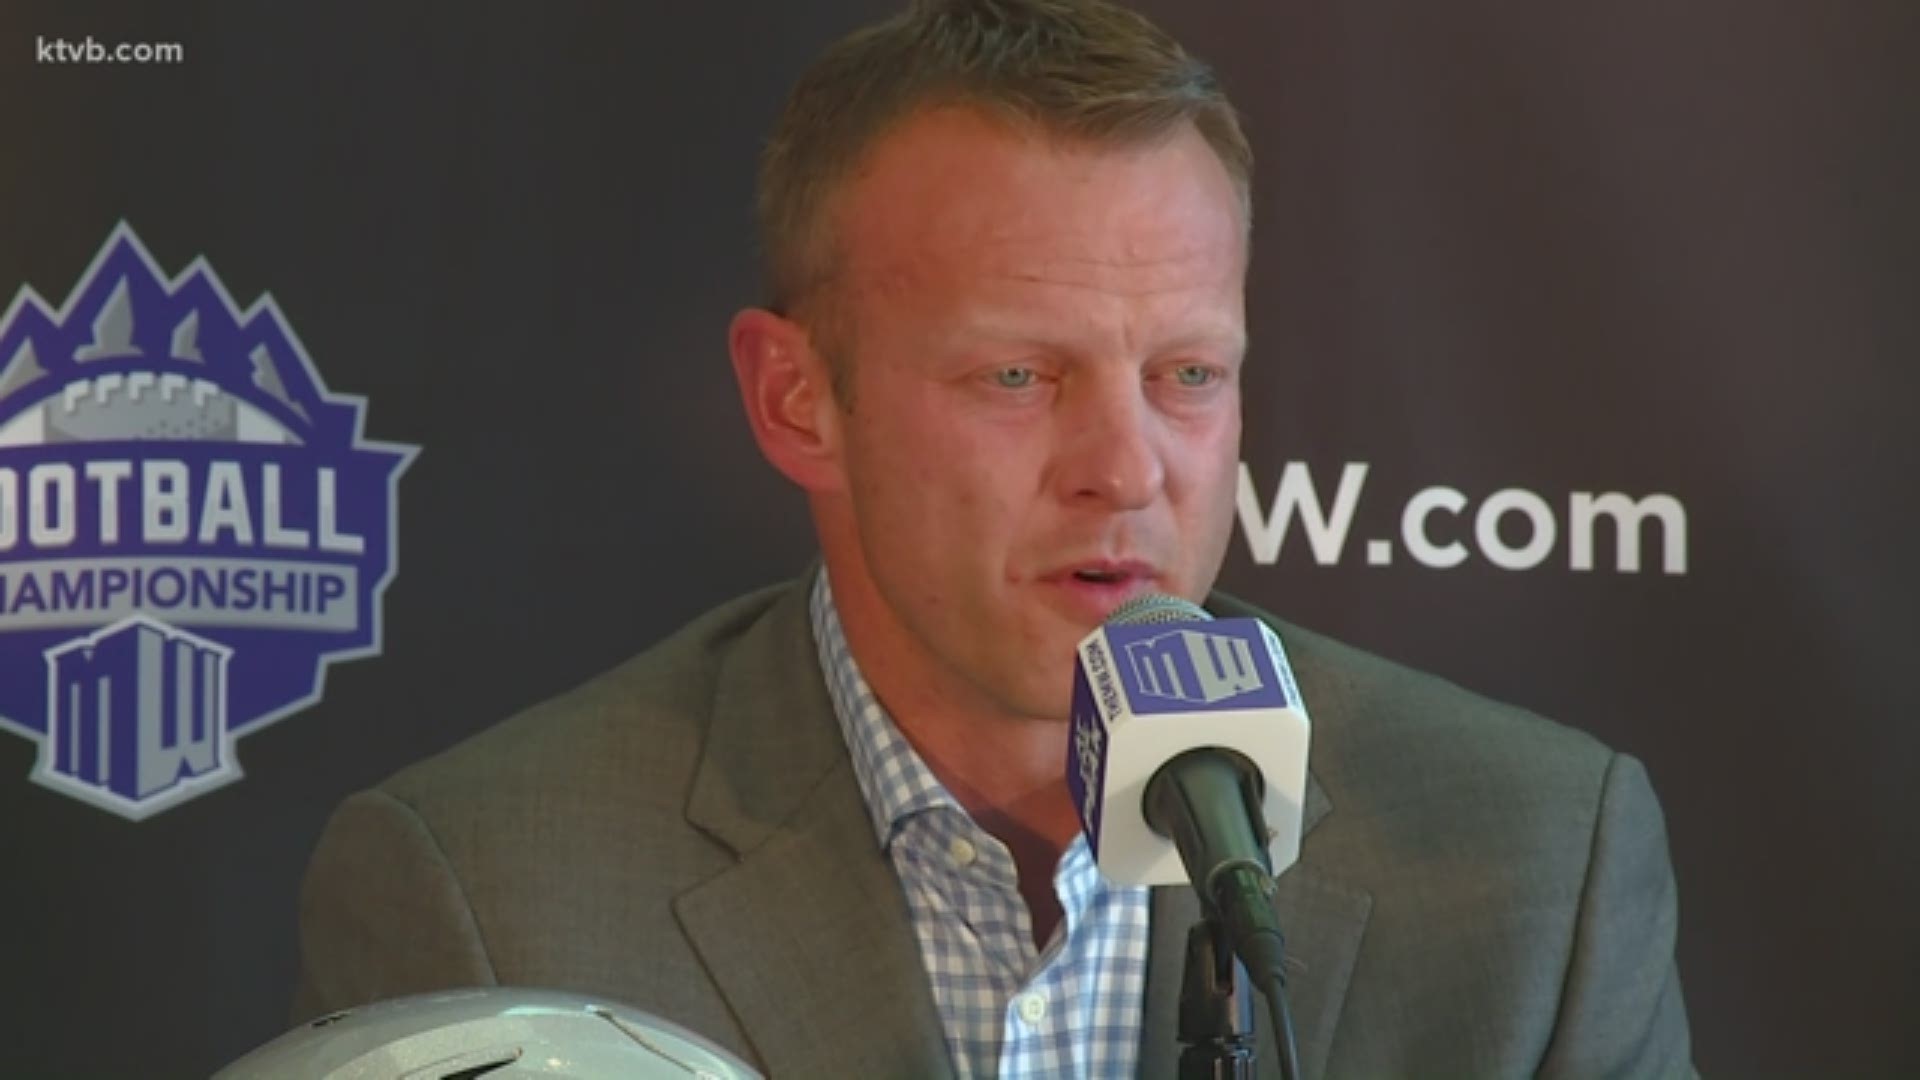 Boise State head coach Bryan Harsin, quarterback Jaylon Henderson and defensive end Curtis Weaver spoke with the media Friday afternoon.